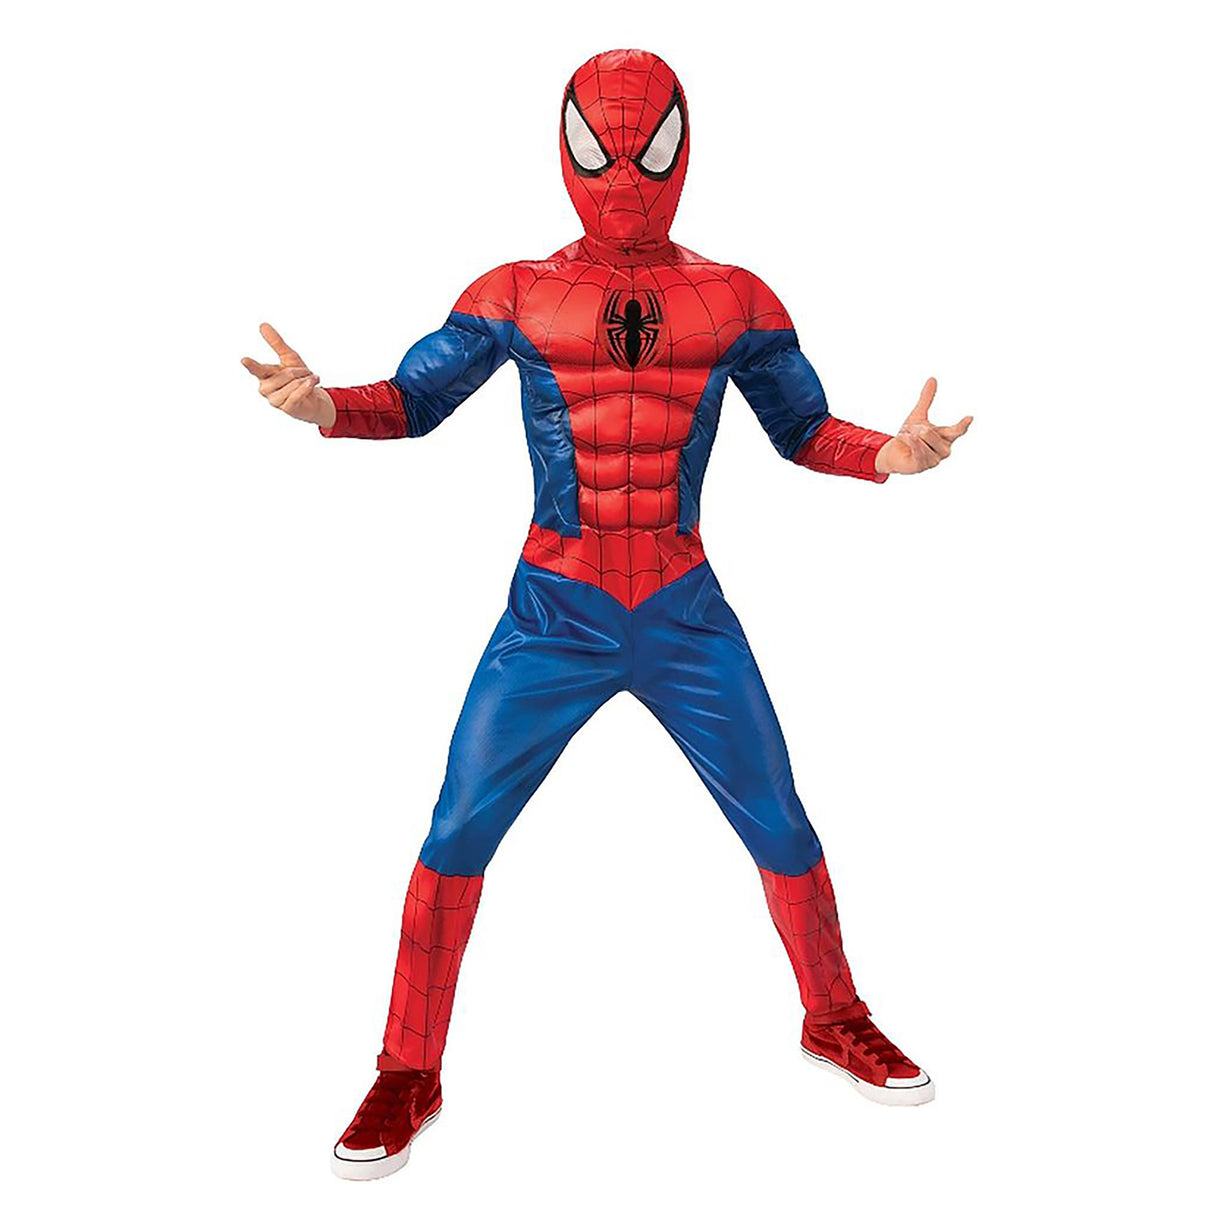 Rubies Spider-Man Deluxe Kids Costume, Red (6-8 years)